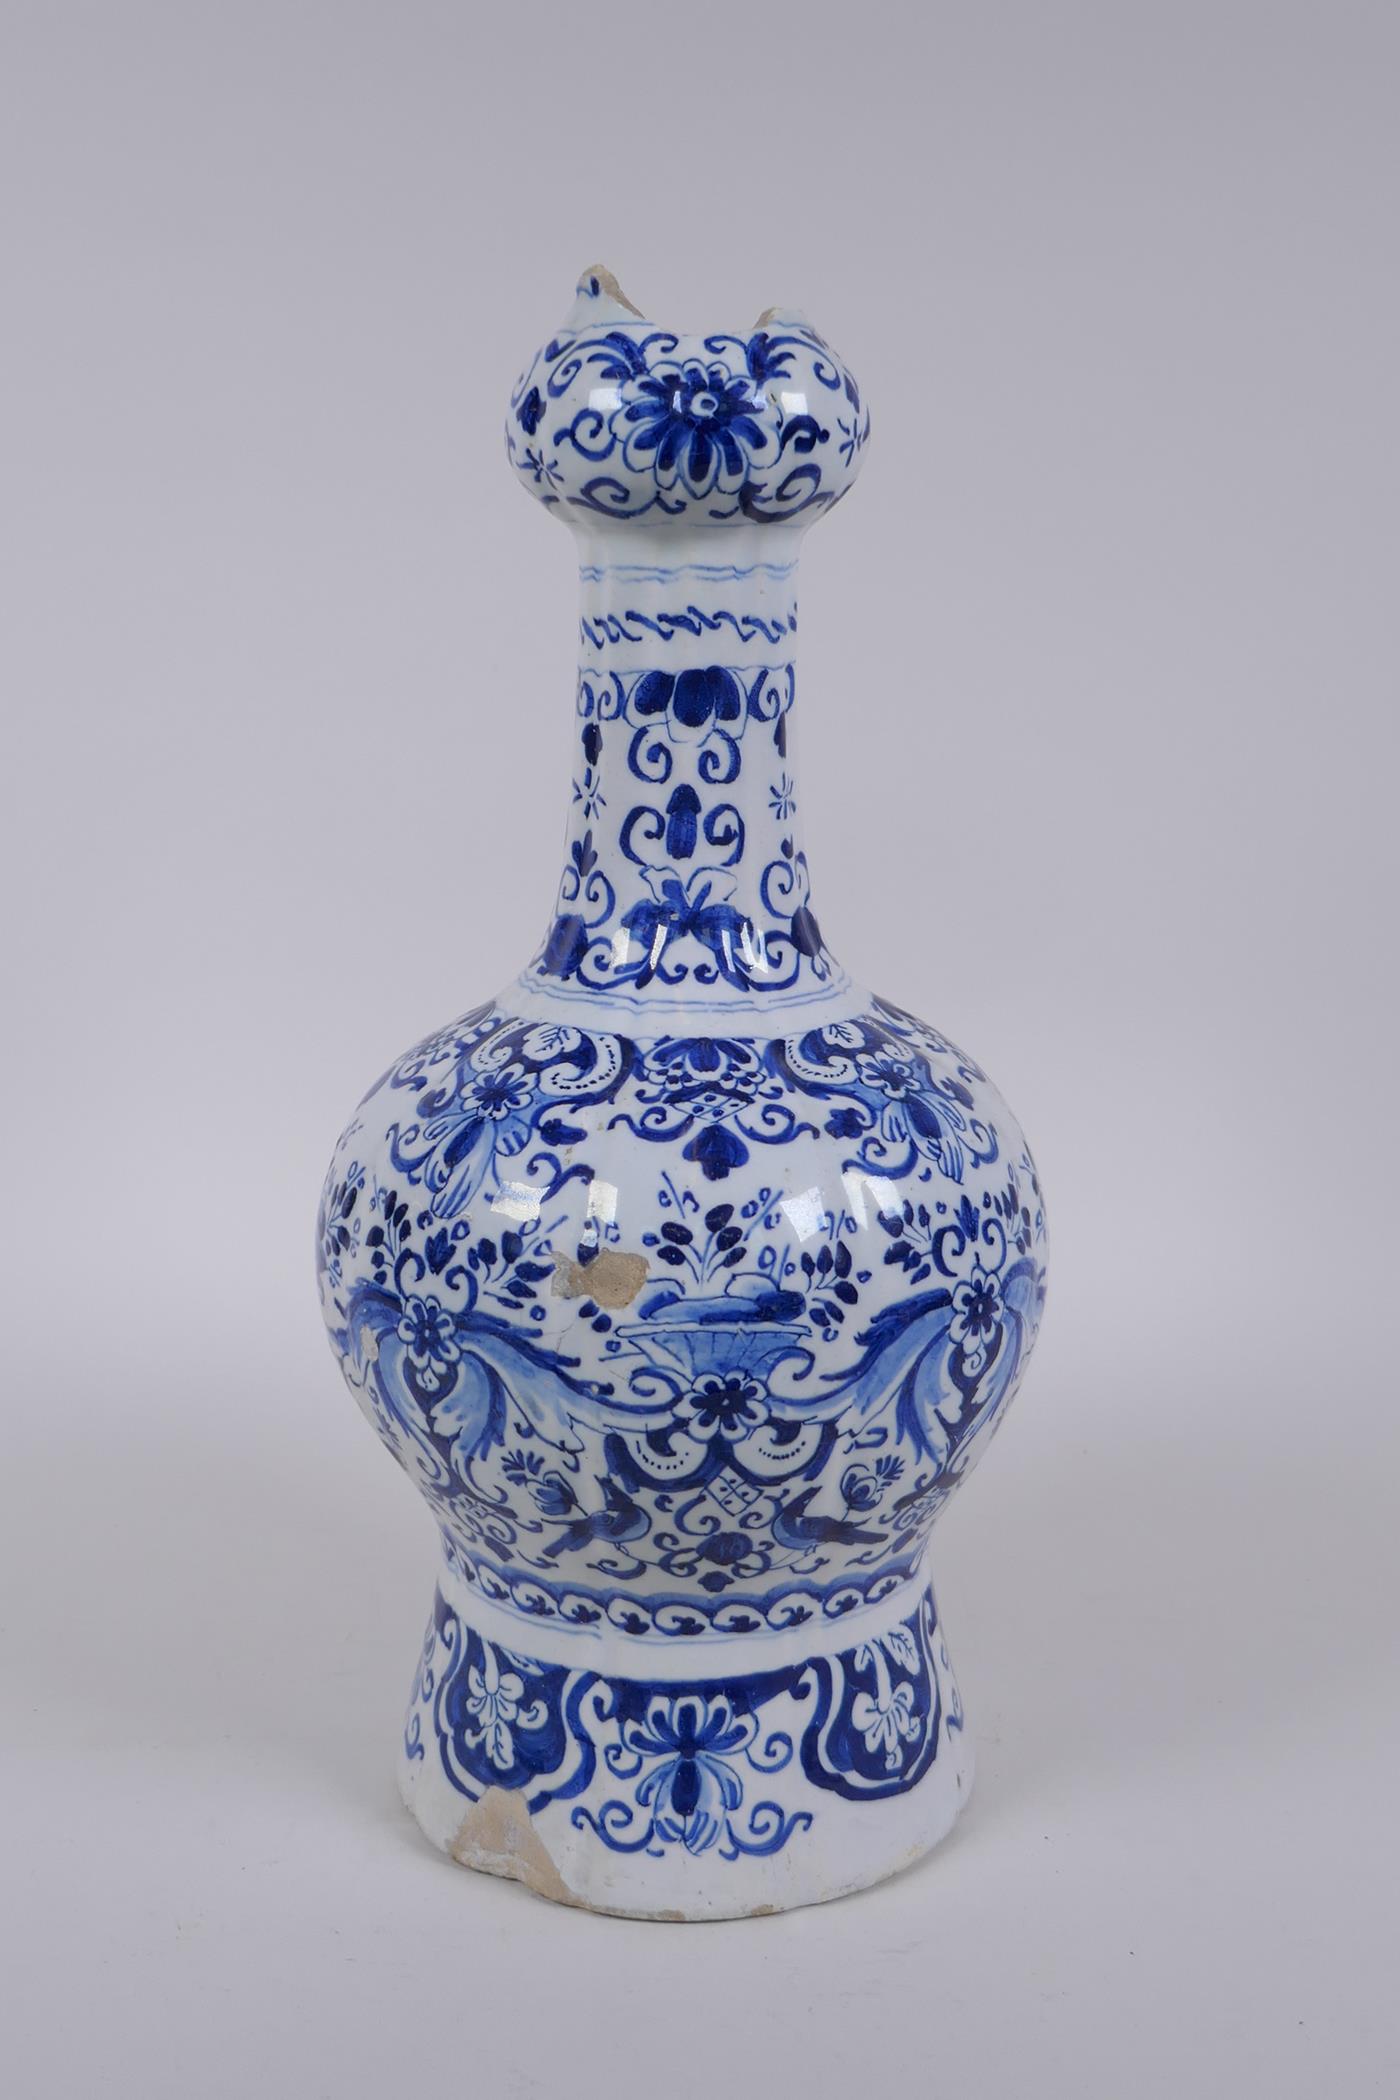 An C18th/C19th Delft blue and white garlic head shaped vase, decorated with birds, flowers and - Image 2 of 7